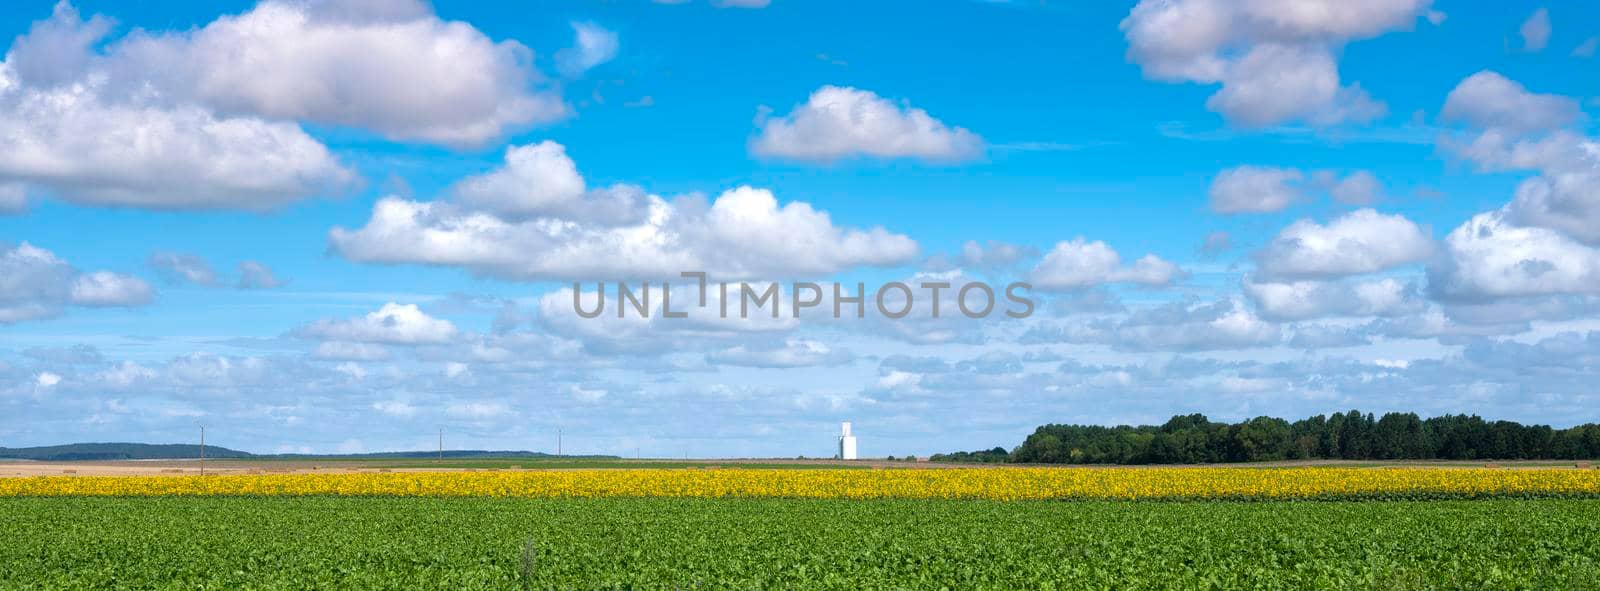 field with sunflowers under blue sky in french champagne ardennes landscape near city of reims by ahavelaar